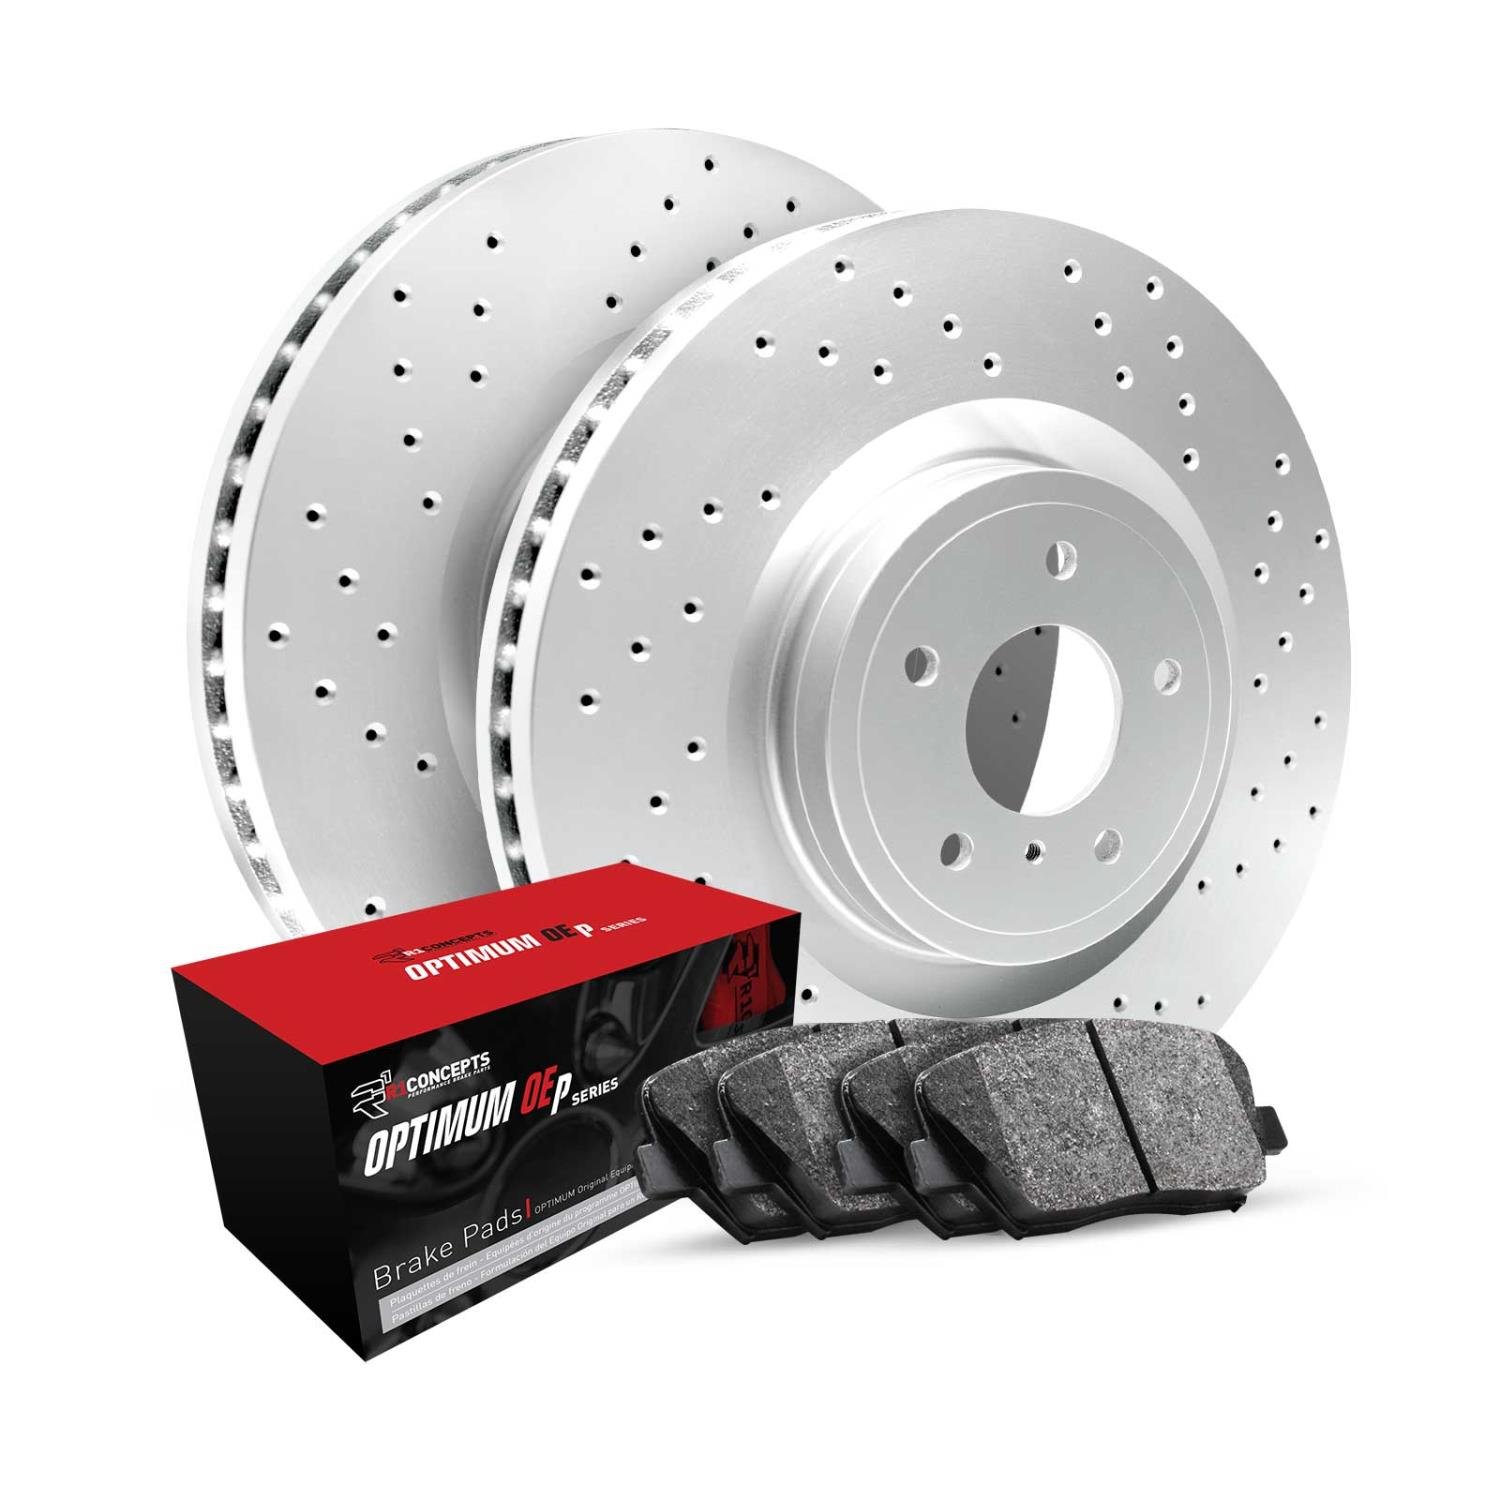 GEO-Carbon Drilled Brake Rotor Set w/Optimum OE Pads, 1992-2000 Fits Multiple Makes/Models, Position: Front